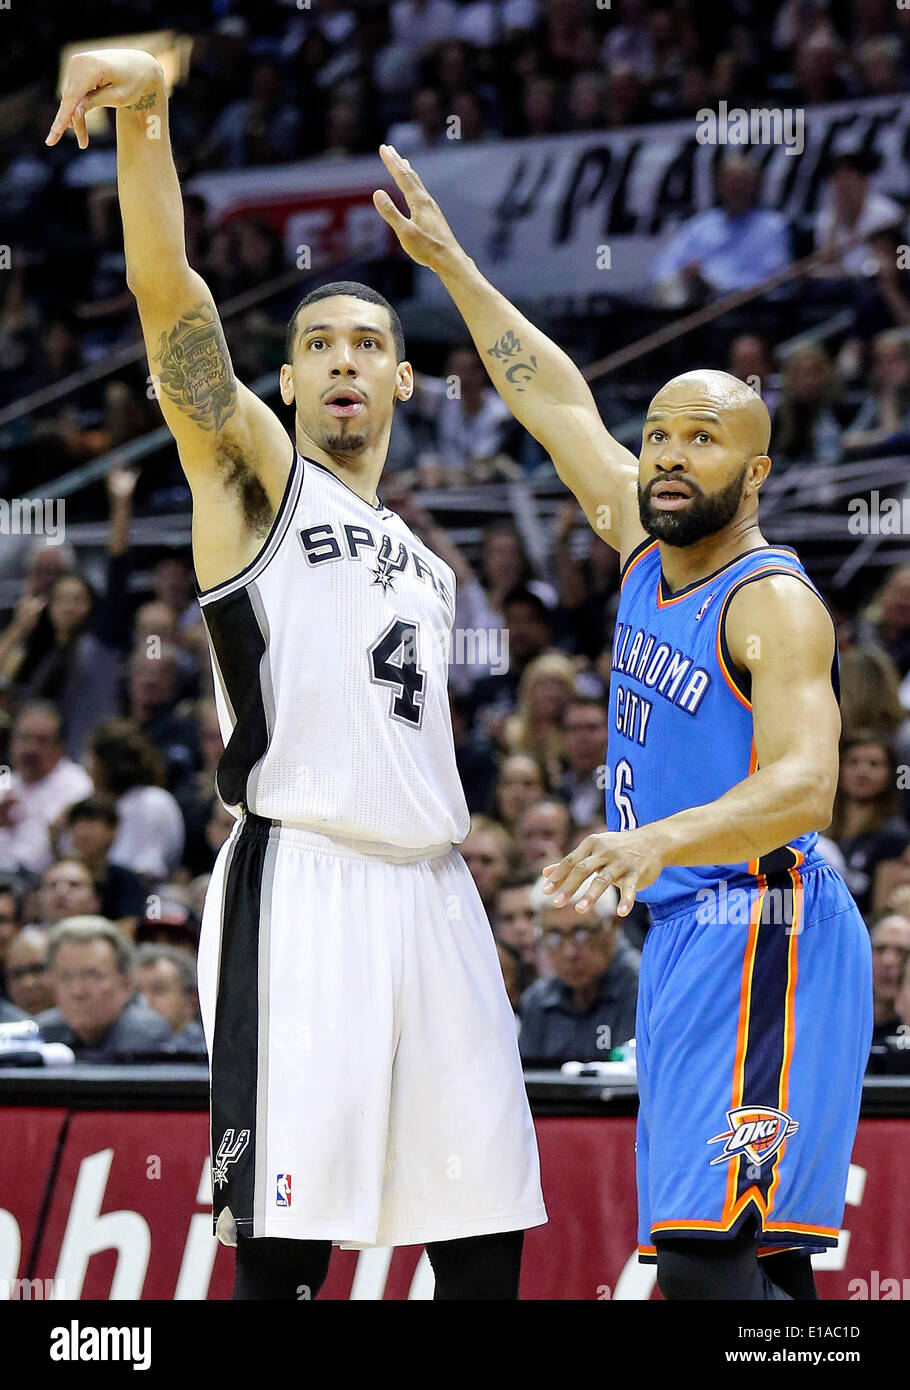 May 21, 2014 - San Antonio, TEXAS, USA - San Antonio Spurs' Danny Green watches his 3 pointer as Oklahoma City Thunder's Derek Fisher looks on during second half action of Game 2 in the Western Conference Finals Wednesday May 21, 2014 at the AT&T Center. The Spurs won 112-77. (Credit Image: © San Antonio Express-News/ZUMAPRESS.com) Stock Photo